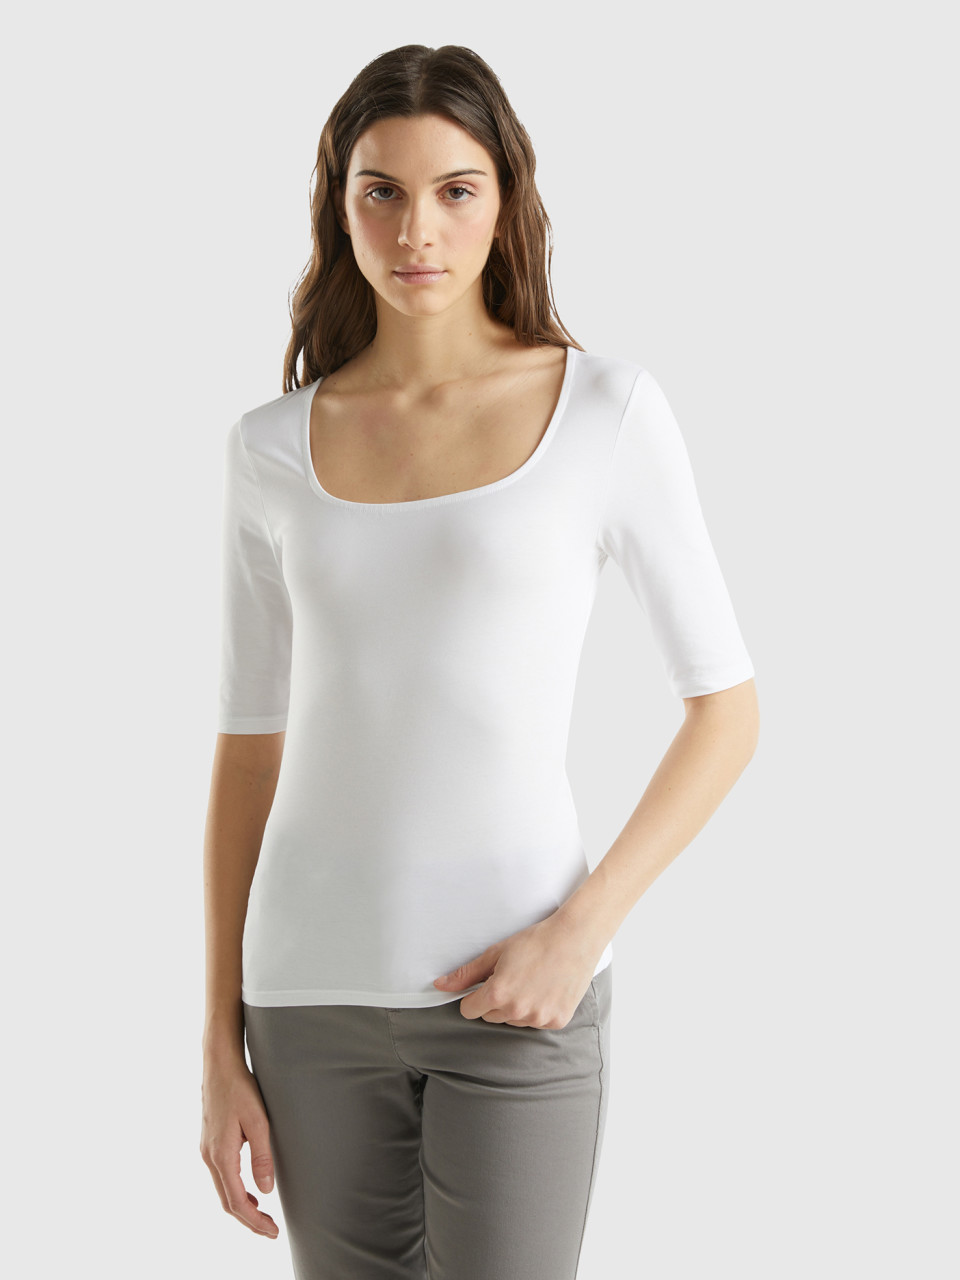 Benetton, Fitted Stretch Cotton T-shirt, White, Women